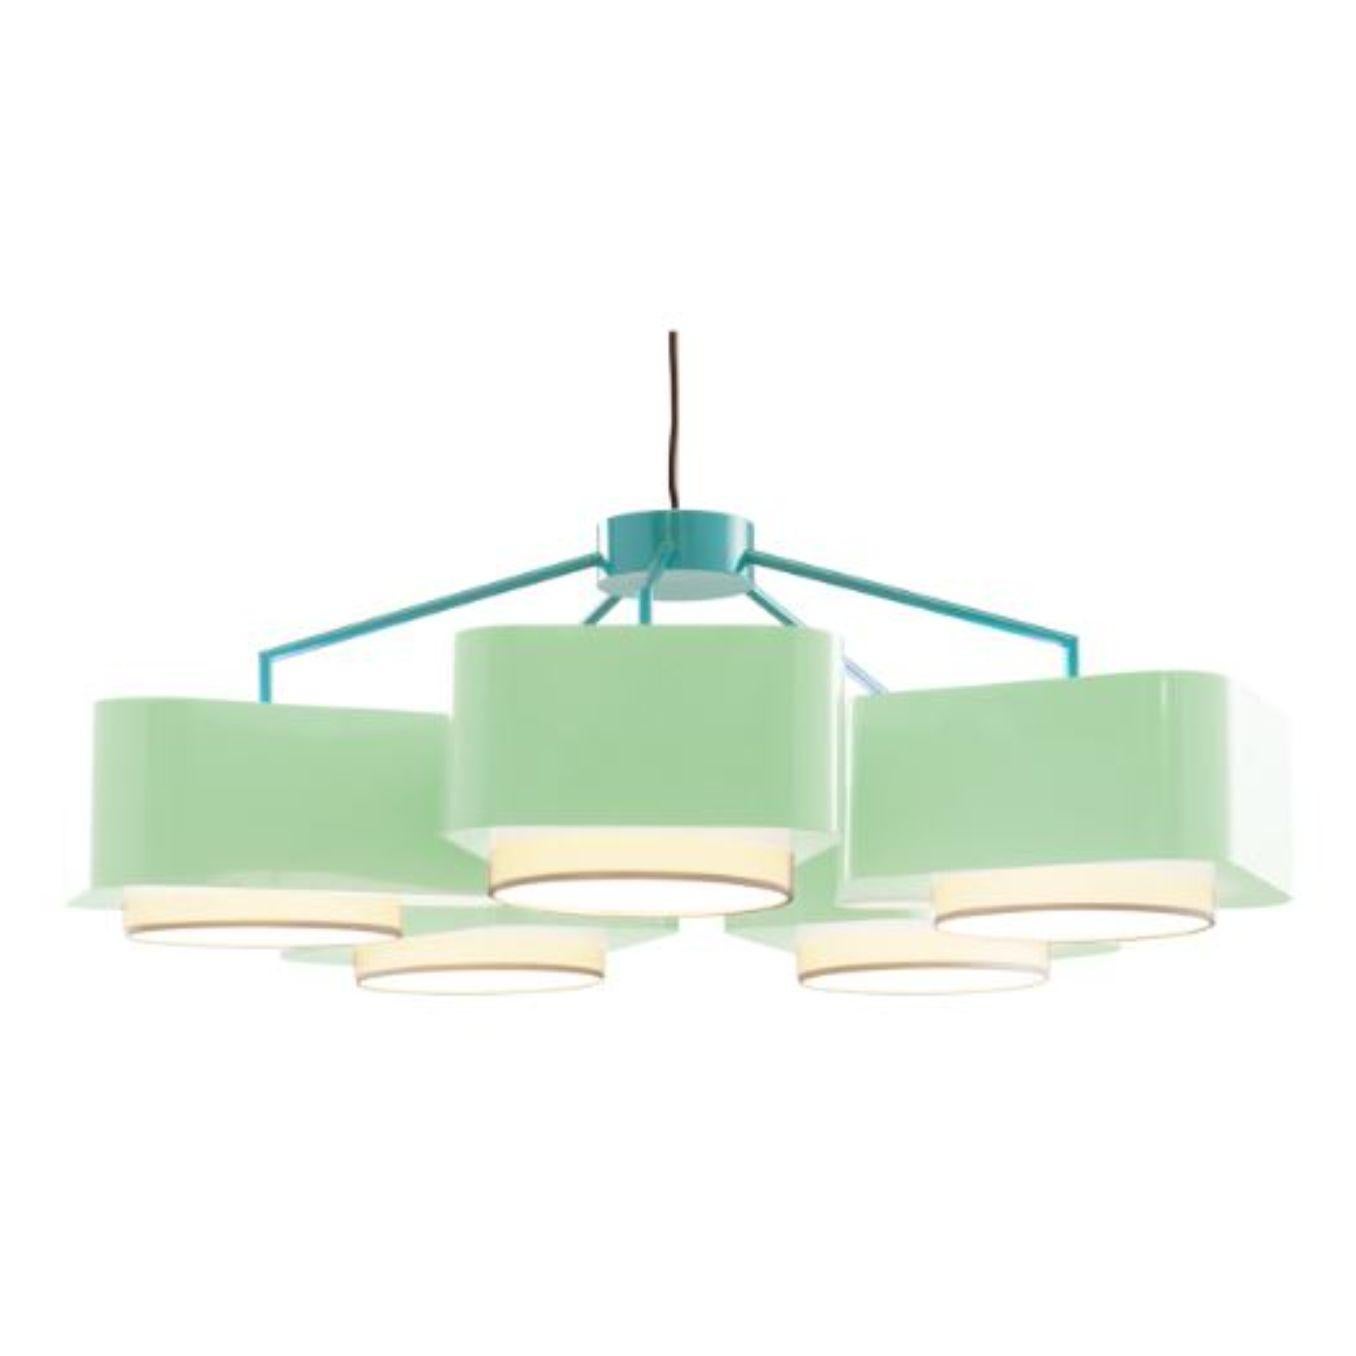 Mint and Dream carousel suspension lamp by Dooq
Dimensions: W 110 x D 110 x H 40 cm
Materials: lacquered metal.
abat-jour: cotton
Also available in different colors.

Information:
230V/50Hz
E27/5x20W LED
120V/60Hz
E26/5x15W LED
bulbs not